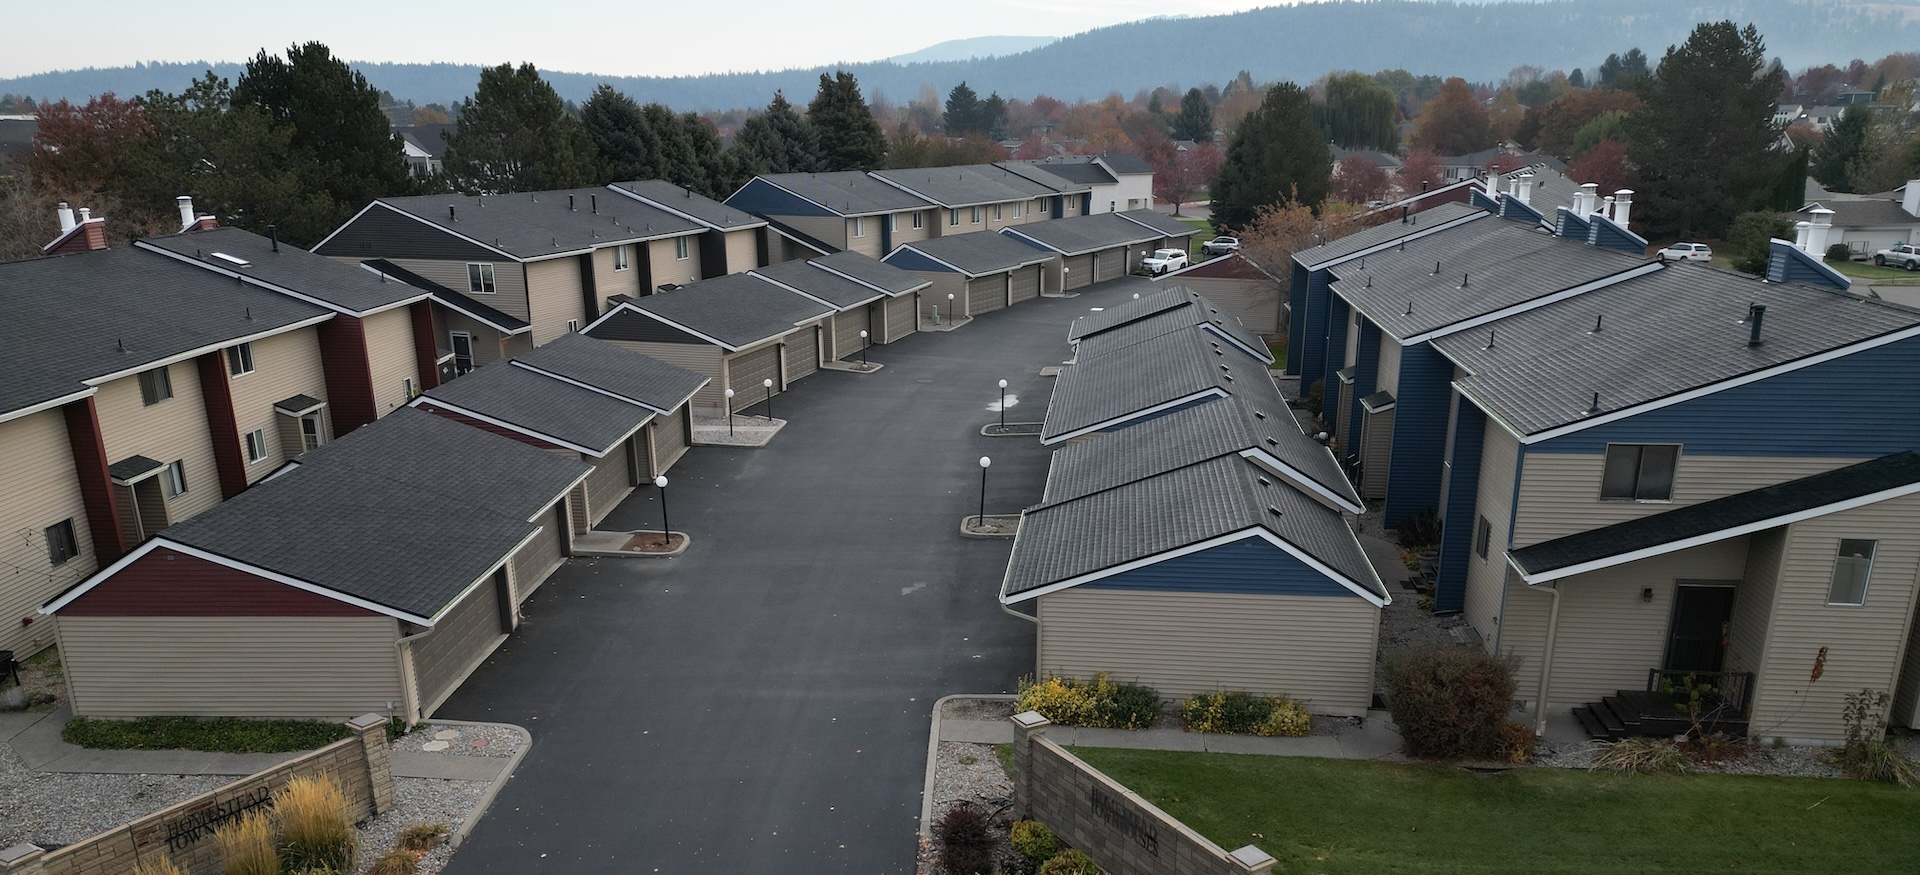 Homestead Townhouses After Shingle Roof Replacement Project Completion - Liberty Lake, WA